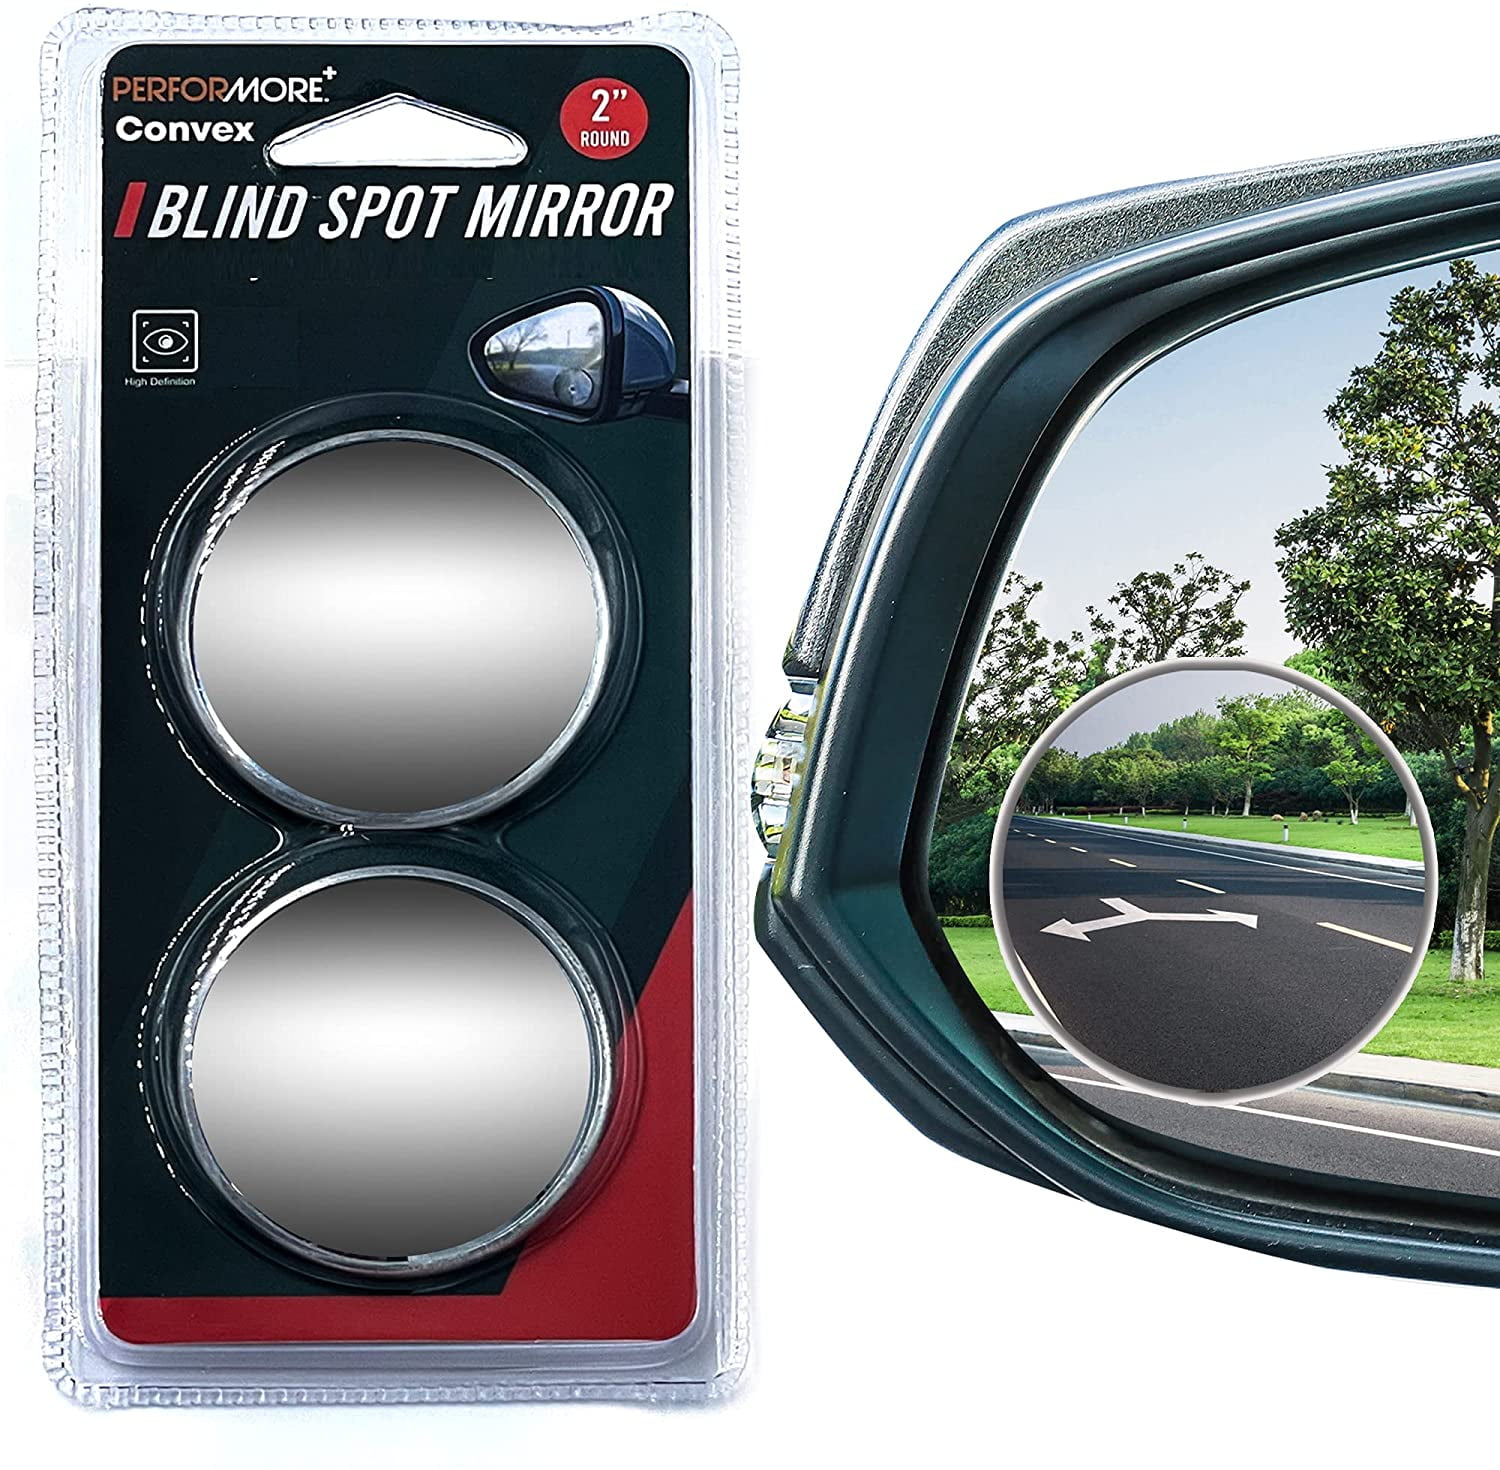 Round 2 Round HD Glass Frameless Convex Rear View Mirror with wide angle Adjustable Stick for Cars SUV and Trucks Car Blind Spot Mirror Pack of 2 